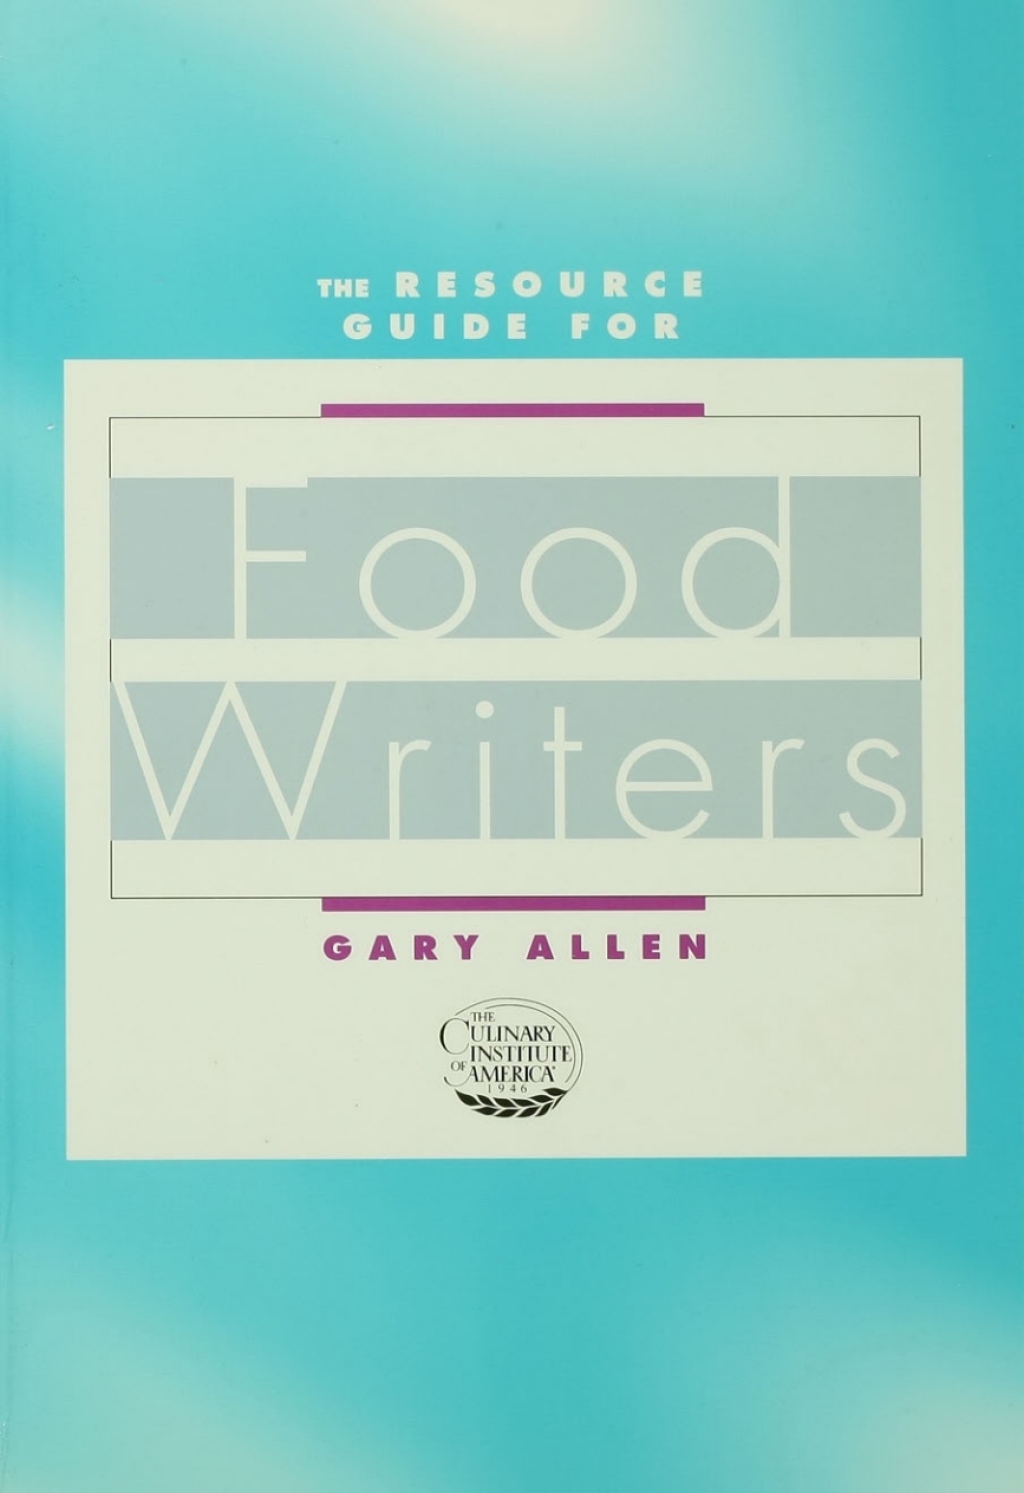 Resource Guide for Food Writers (eBook) - Gary Allen